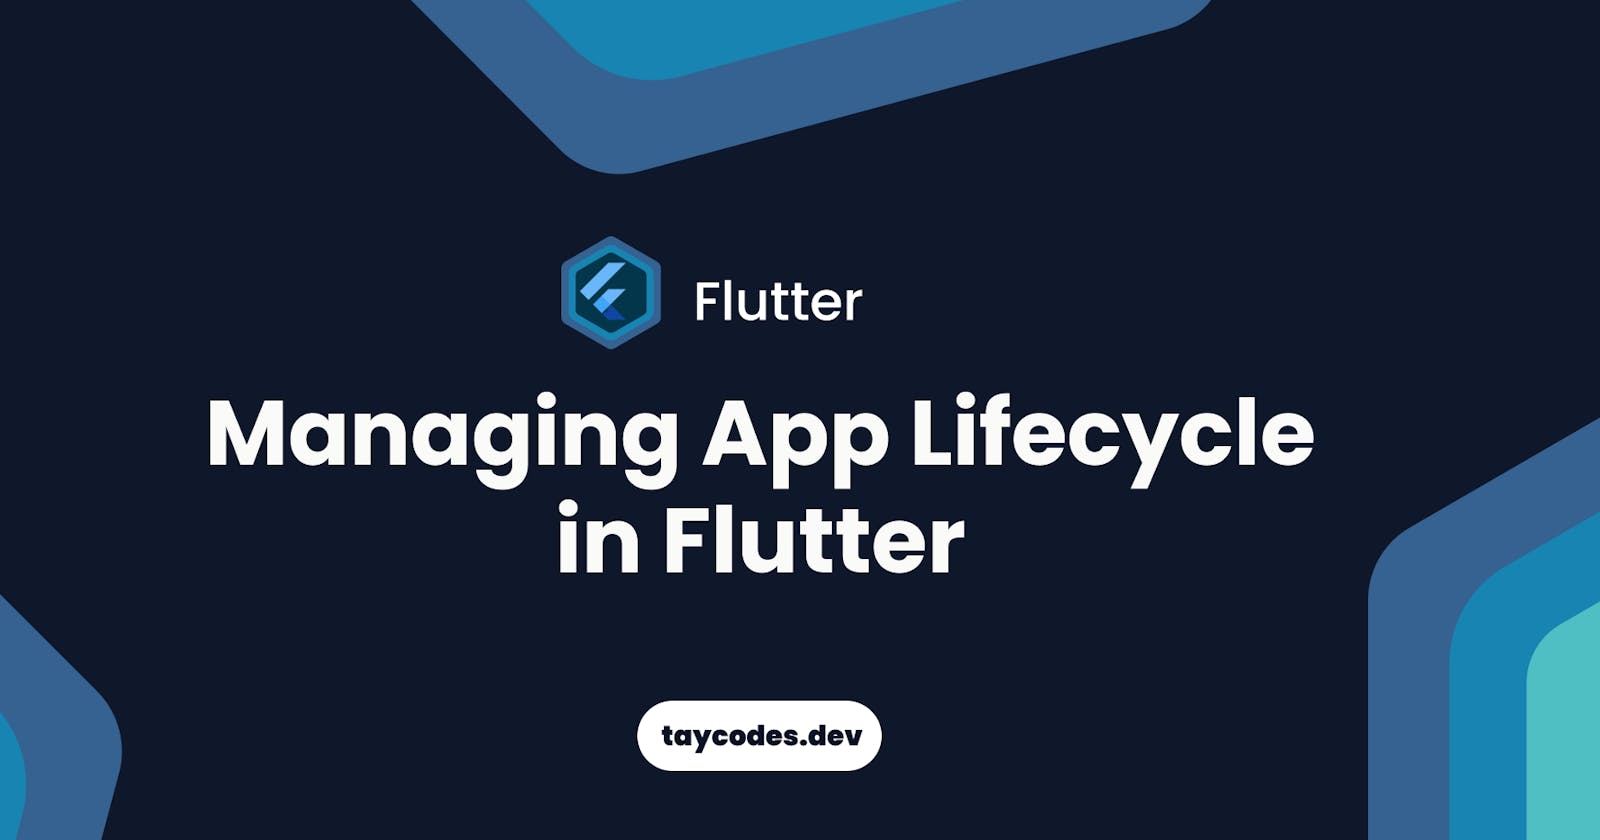 Managing App Lifecycle in Flutter.